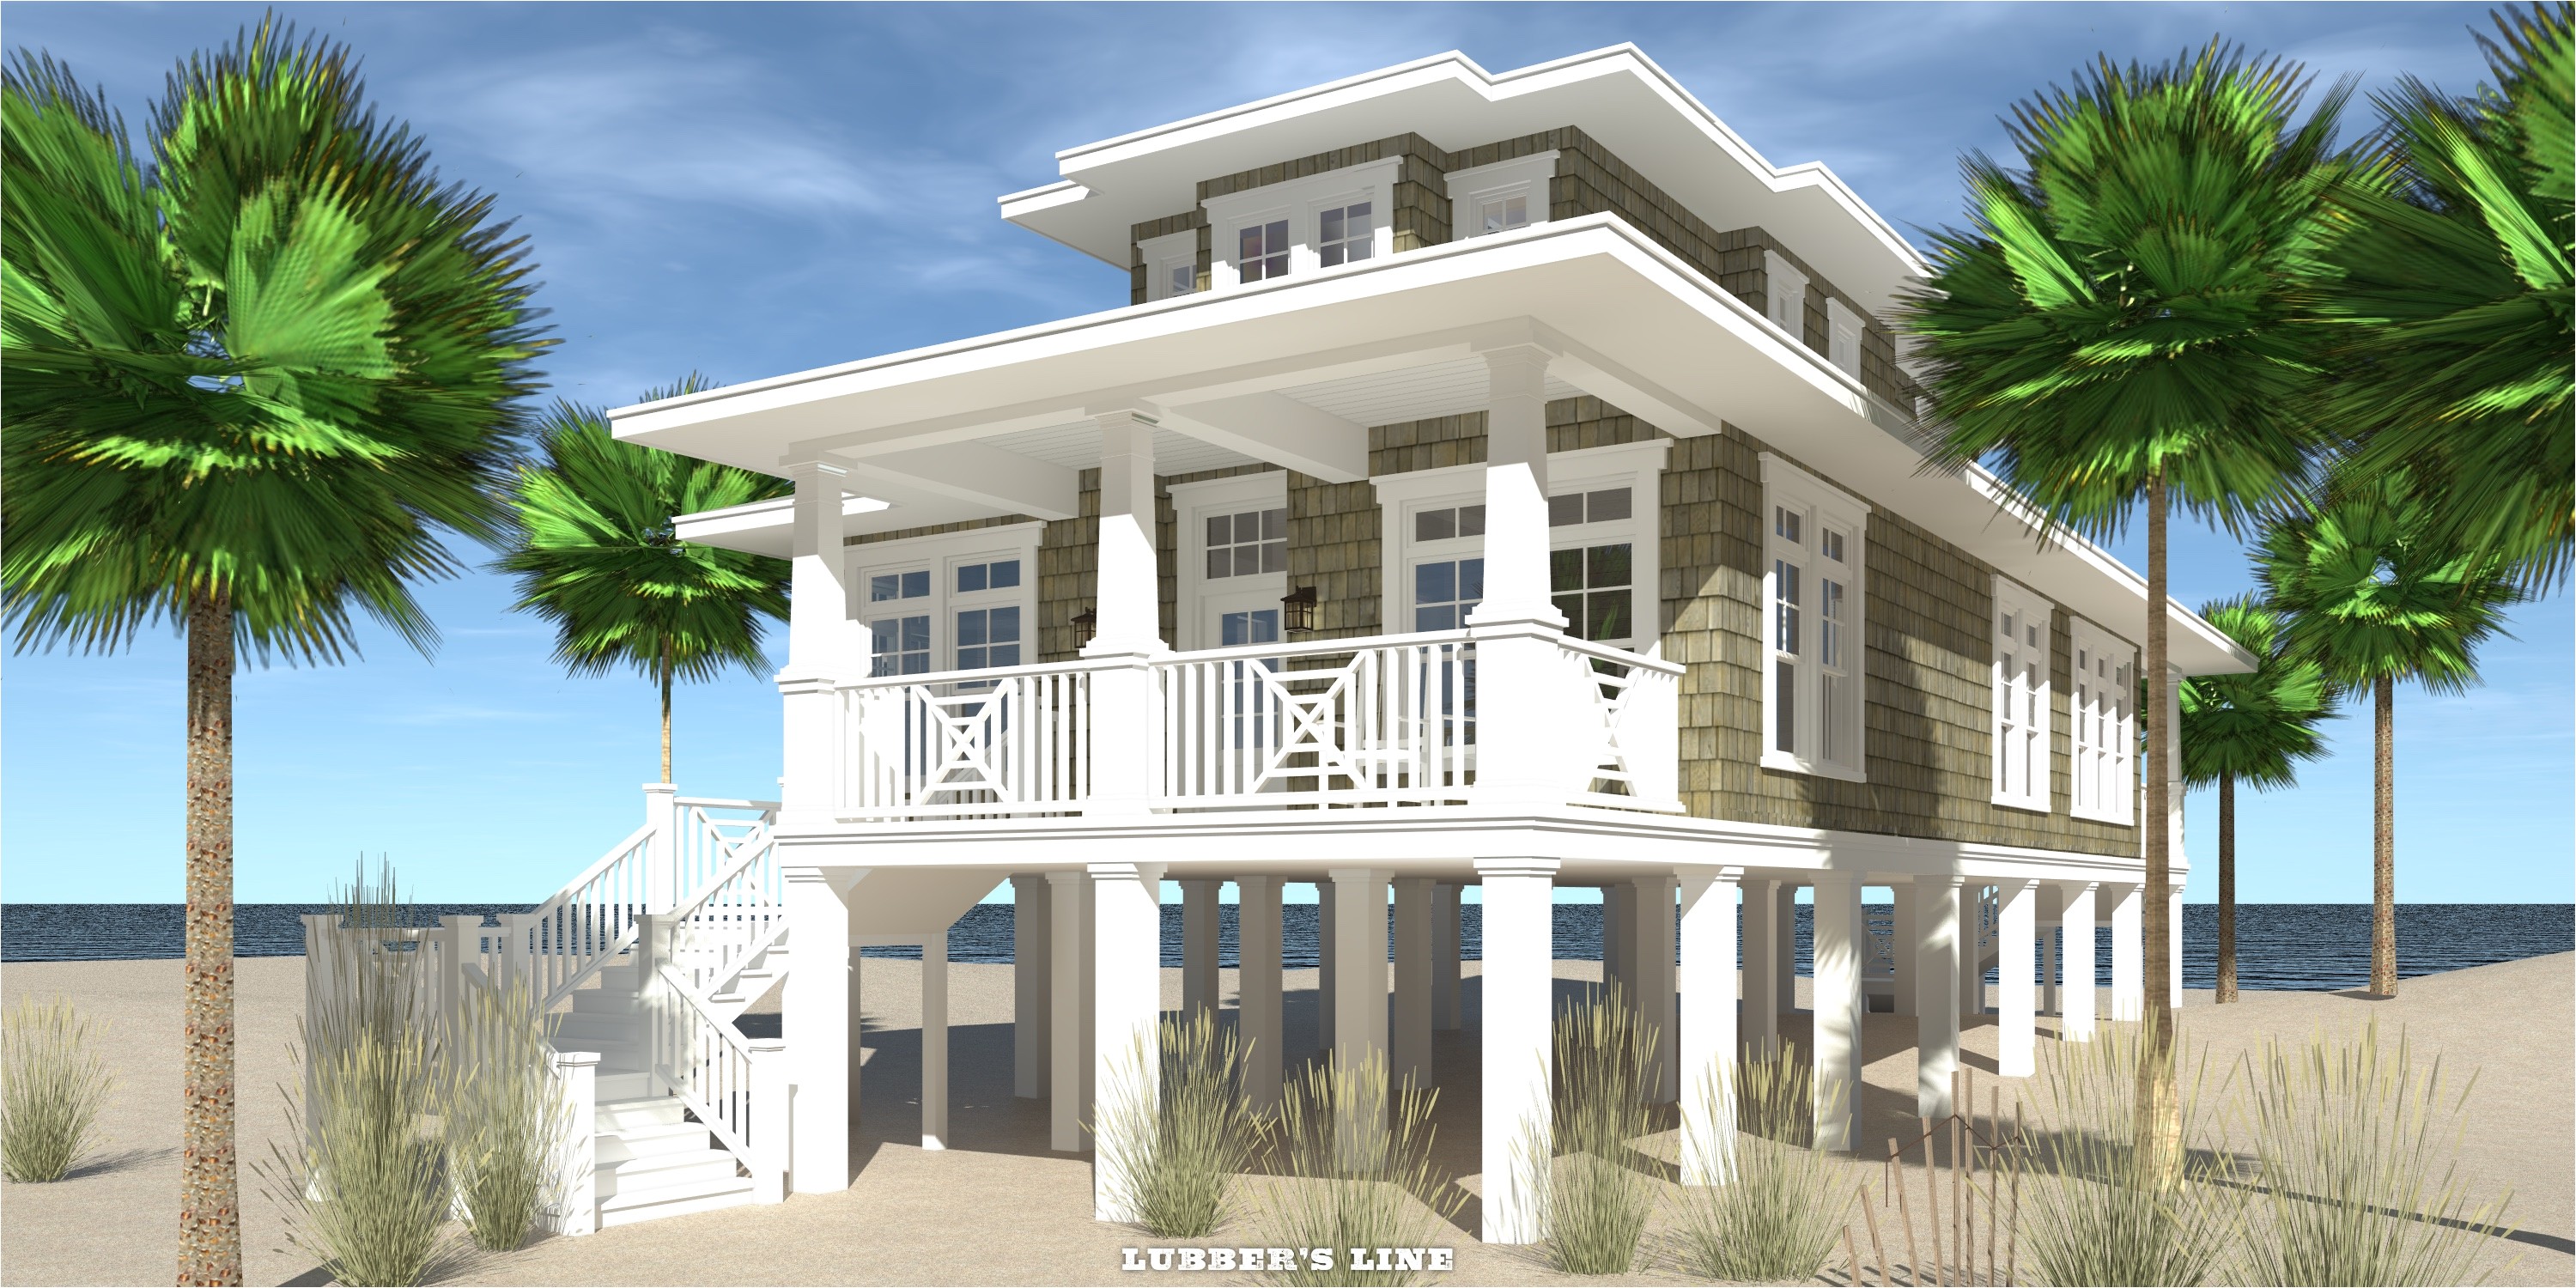 House Plans for Beach Houses Beach House Plans with Front View